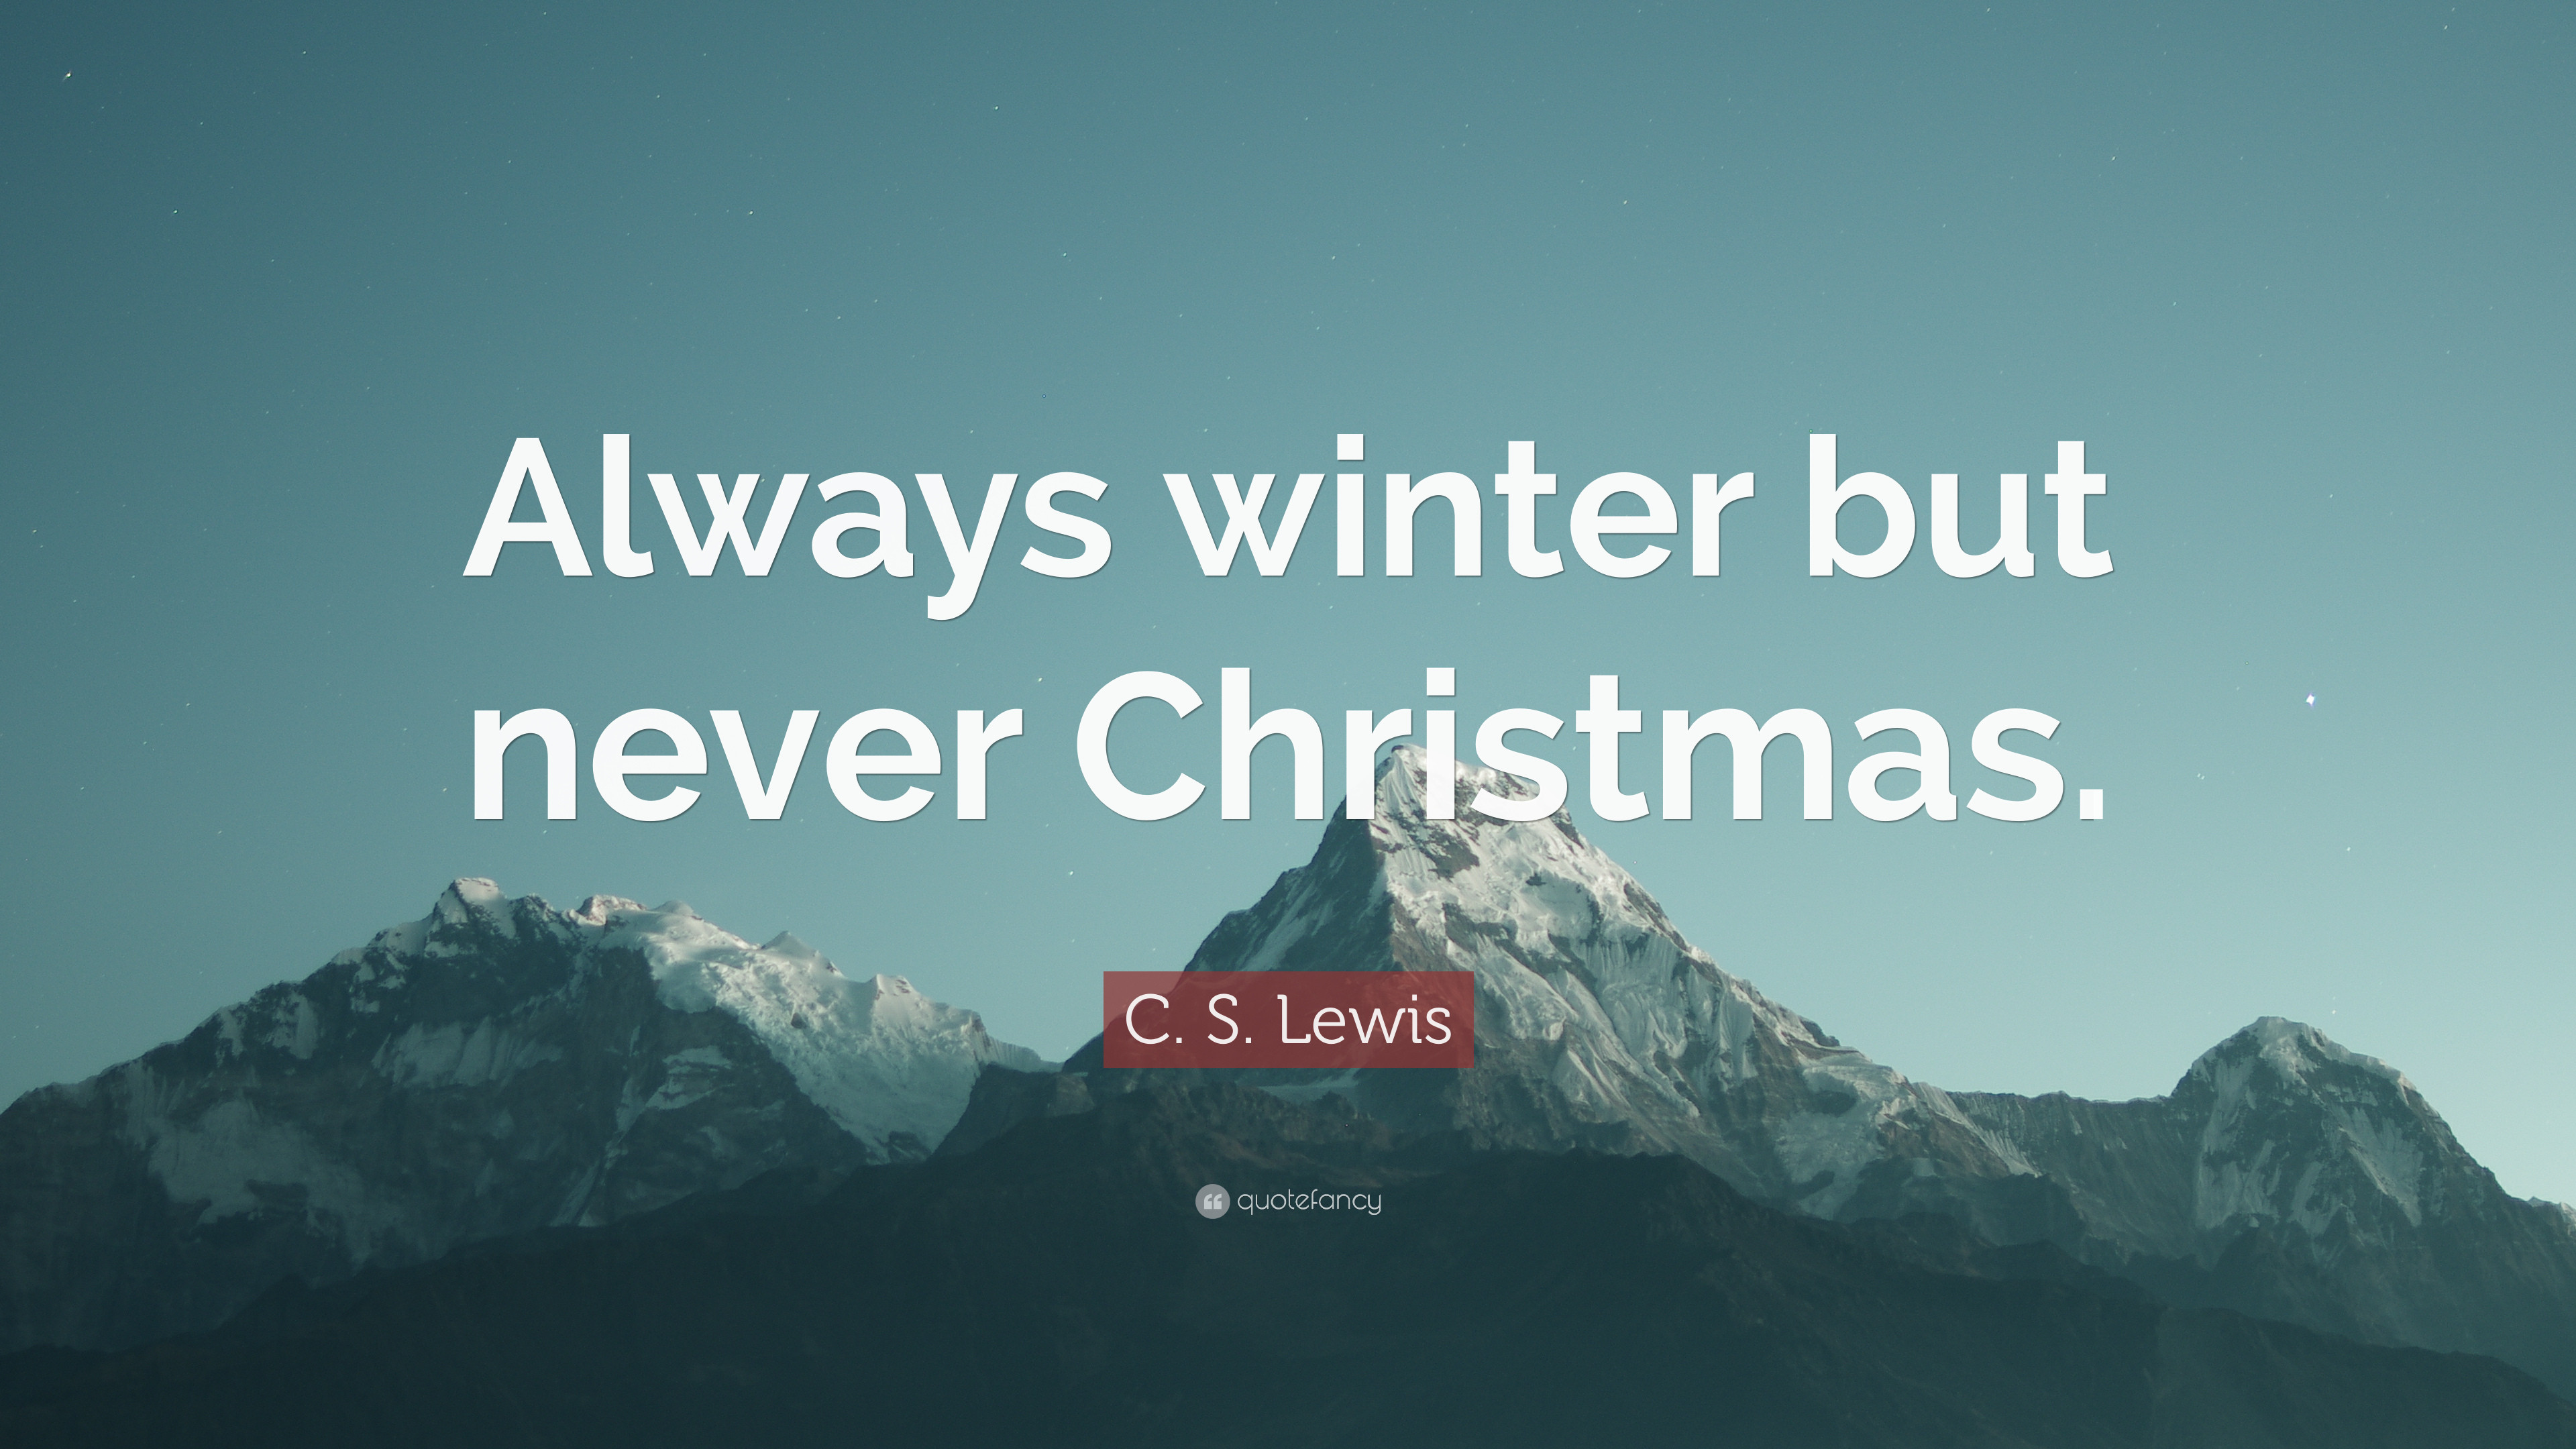 C.S.Lewis Christmas Quotes
 C S Lewis Quote “Always winter but never Christmas